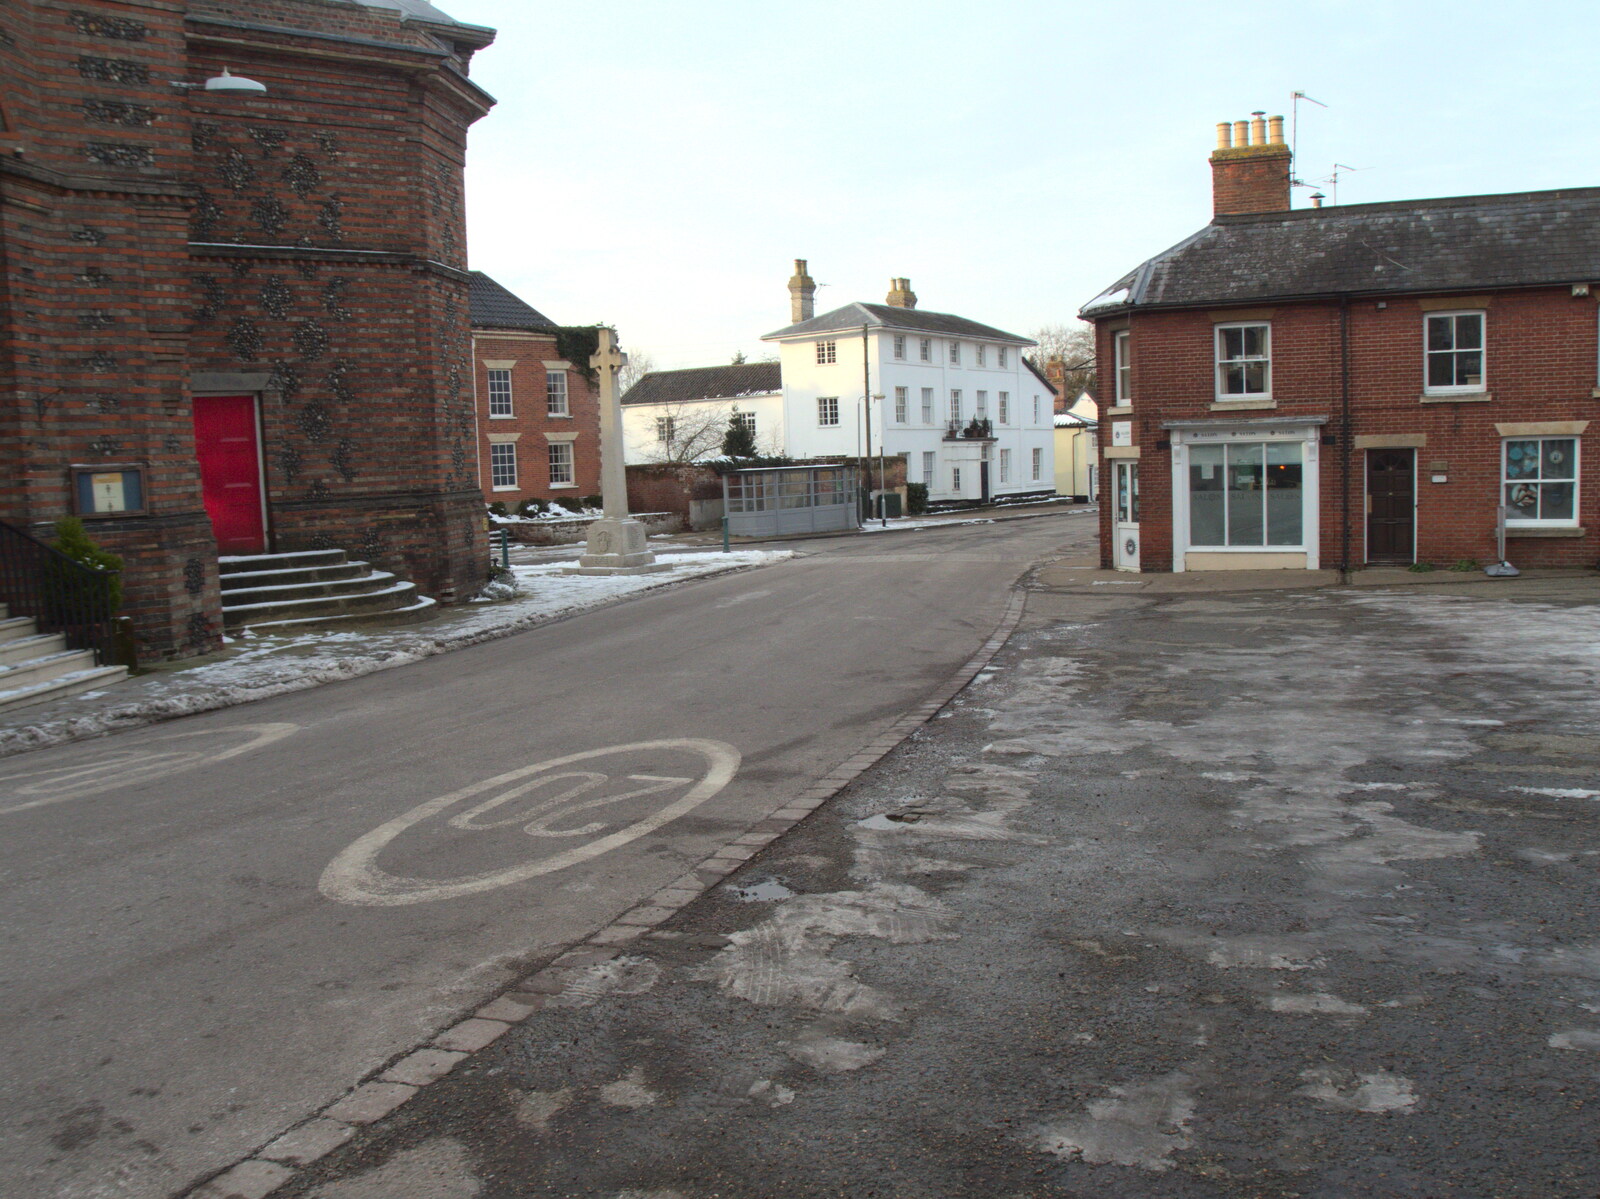 A deserted Eye town centre from Derelict Infants School and Ice Sculptures, Diss and Palgrave, Norfolk and Suffolk - 13th February 2021